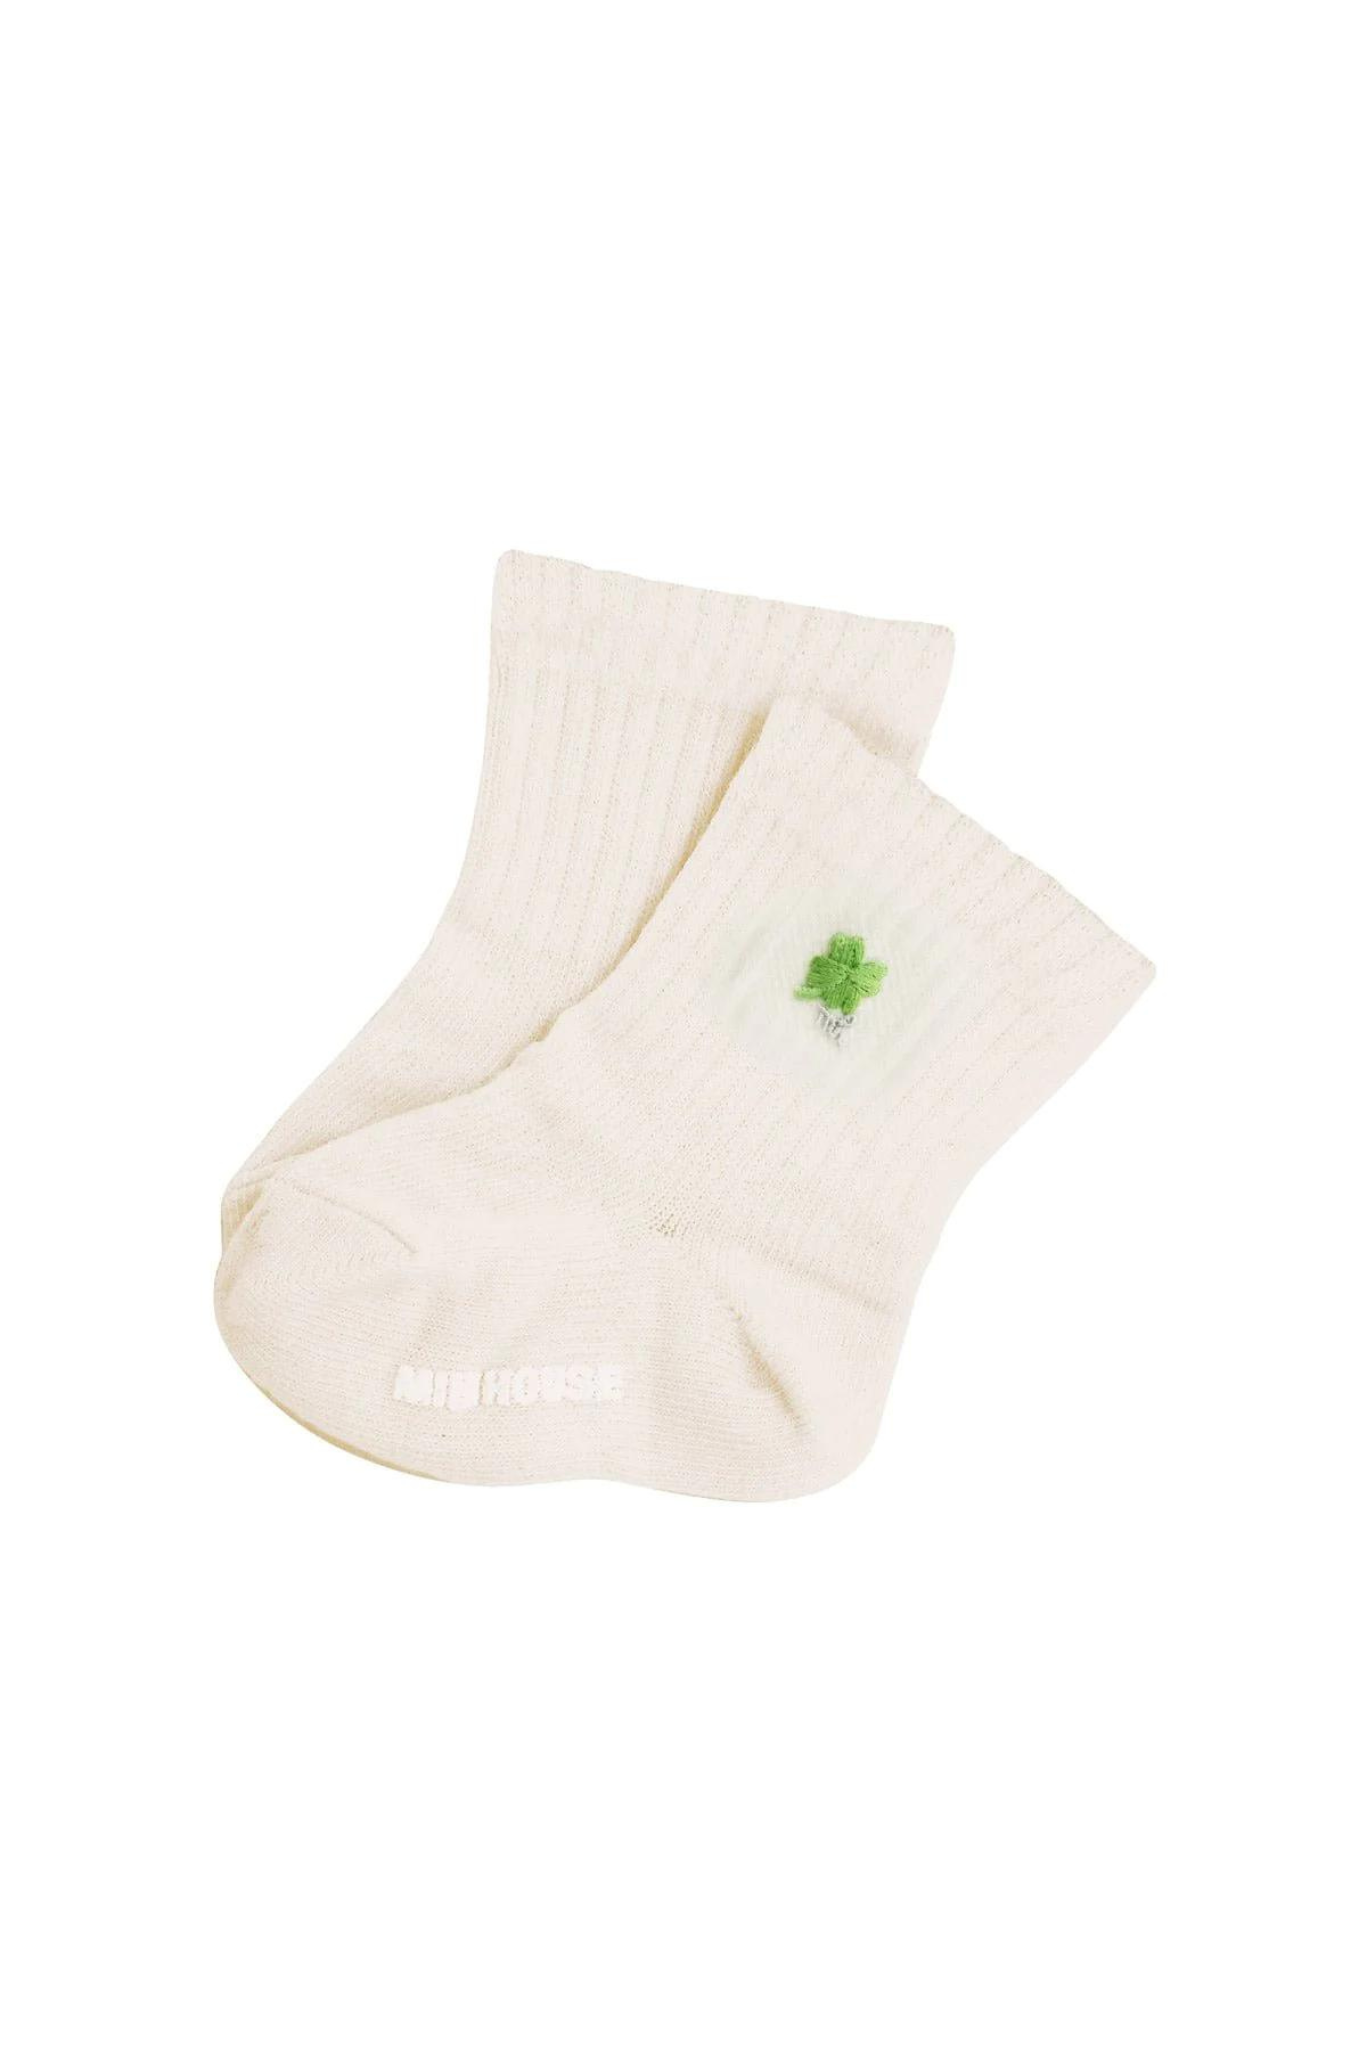 Clover Embroidered Baby Socks